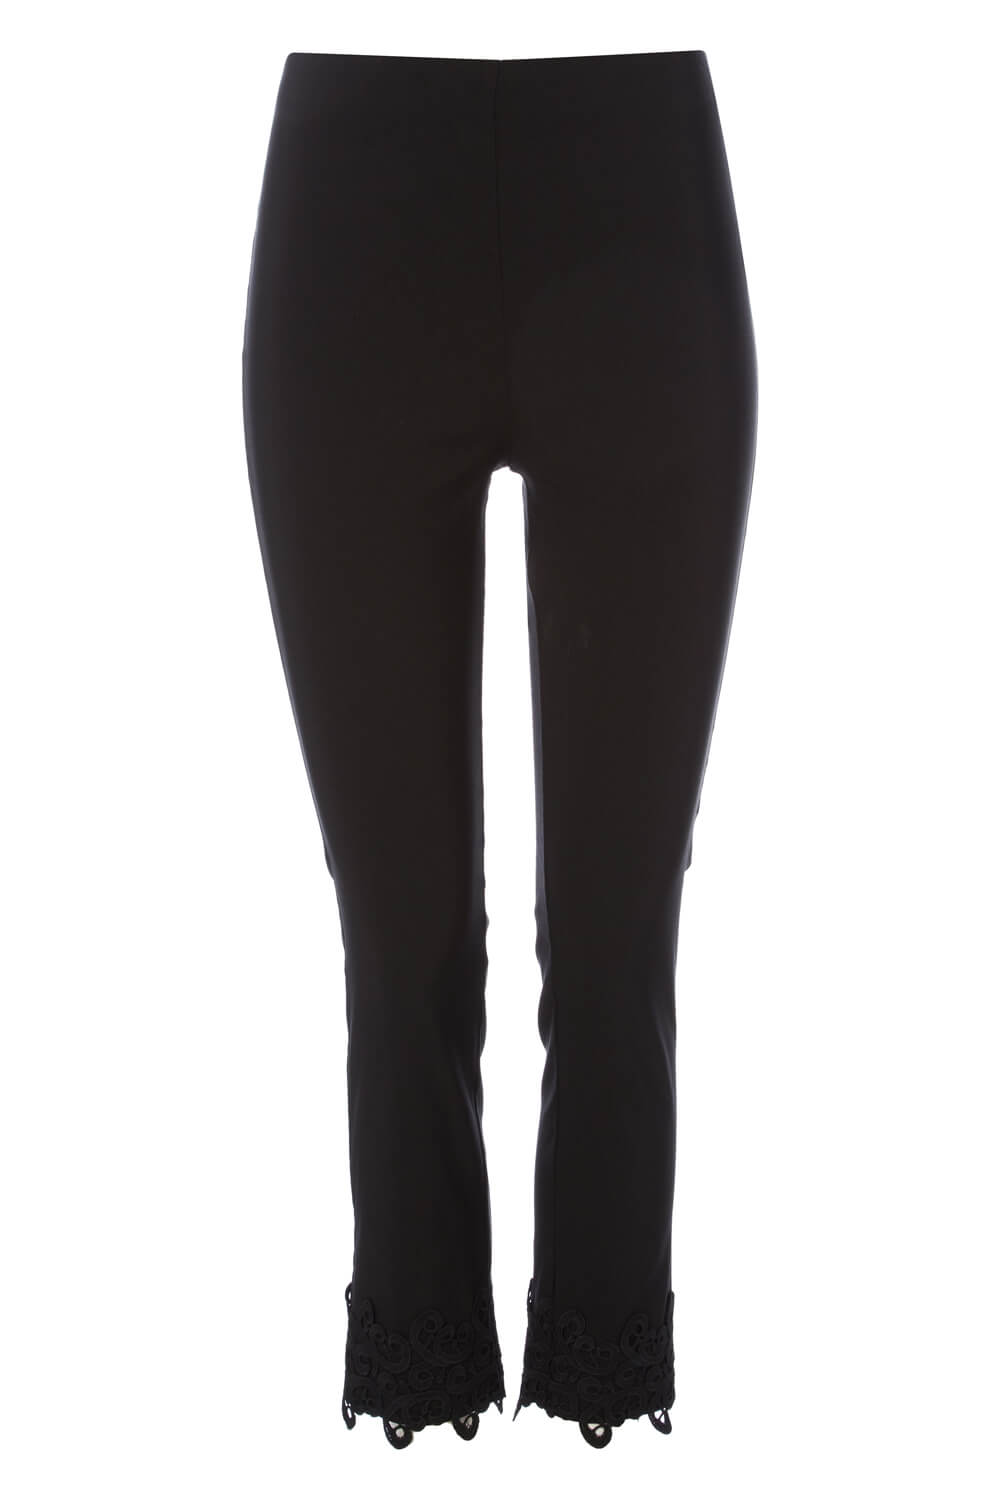 Black Cropped Stretch Trousers with Lace Hem, Image 5 of 5